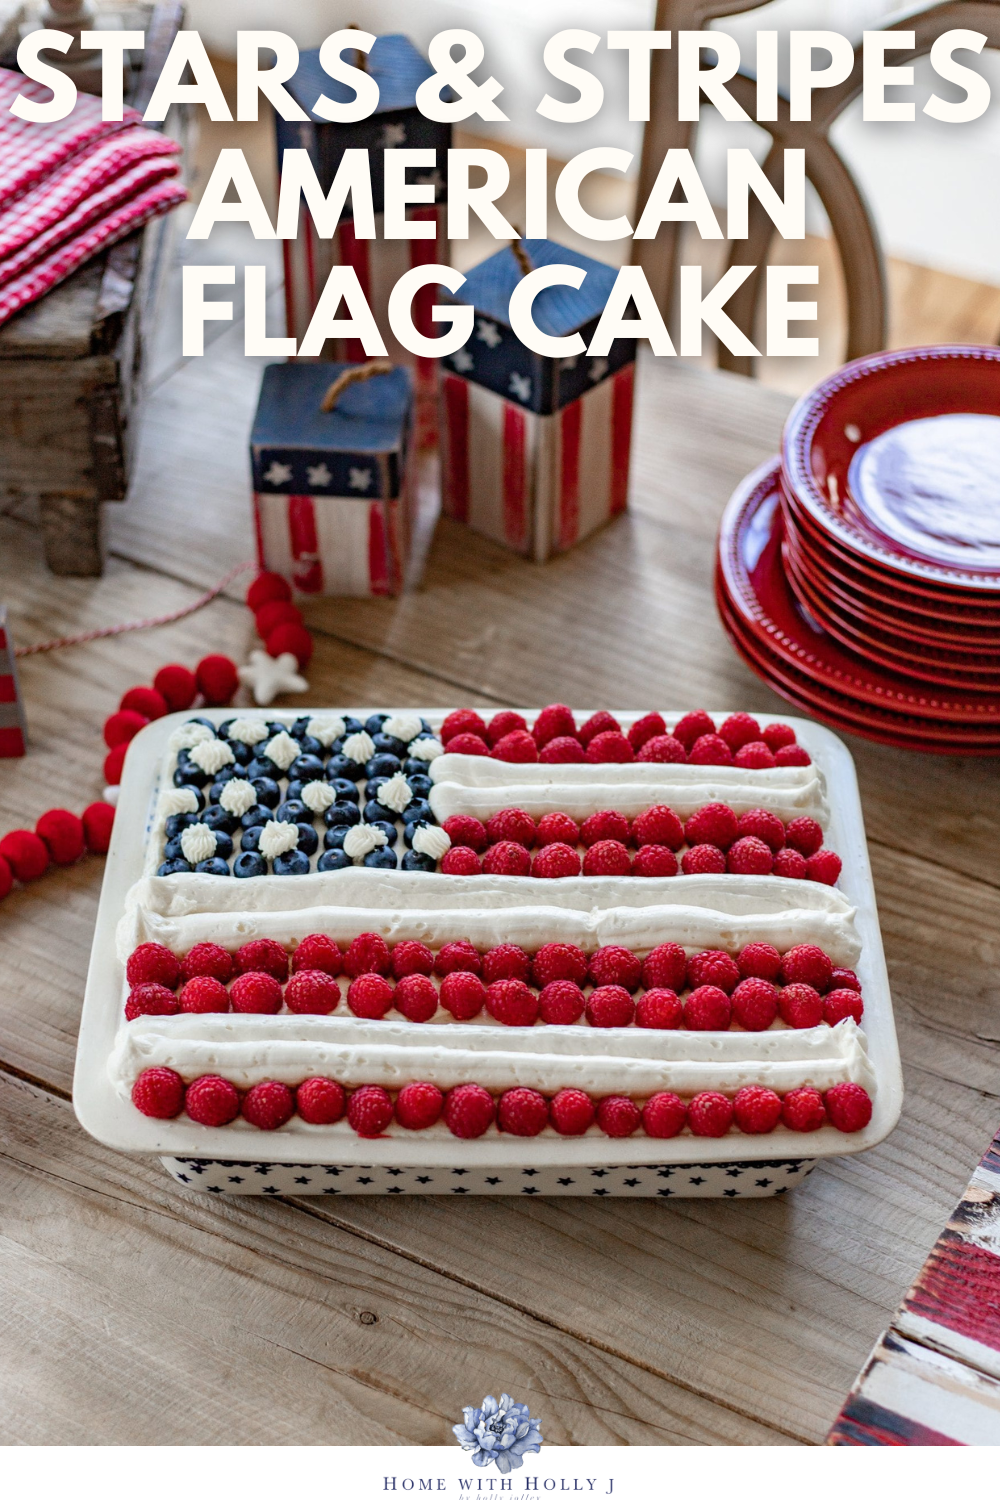 Sharing how I made this easy-to-decorate Stars and Stripes American Flag Cake recipe for any patriotic event. Learn more here.